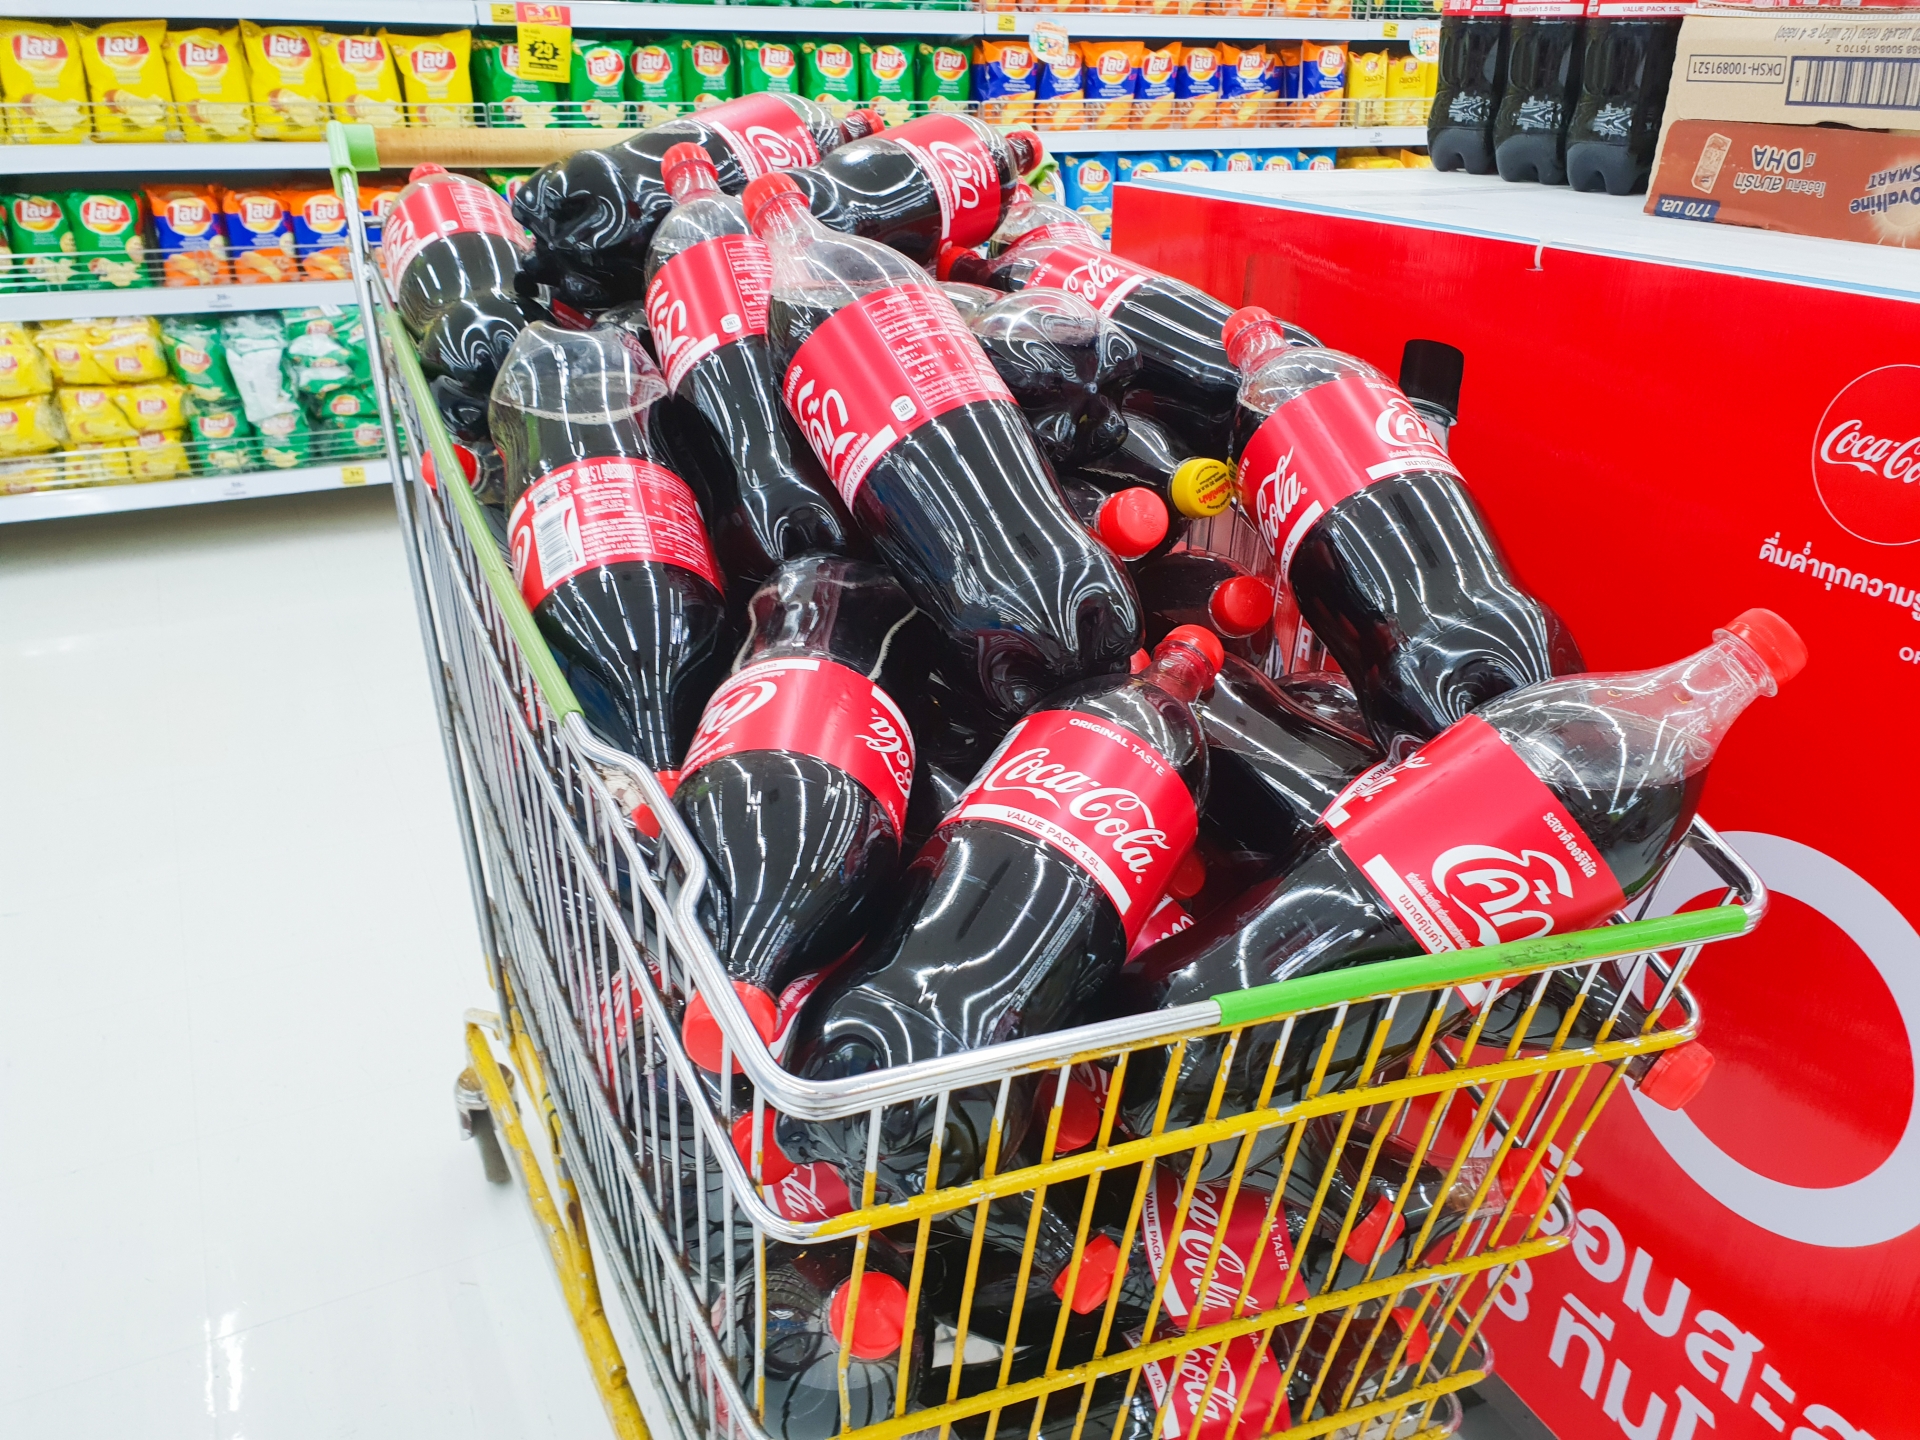 No surprise: Coca-cola is the world’s largest plastic waste producer